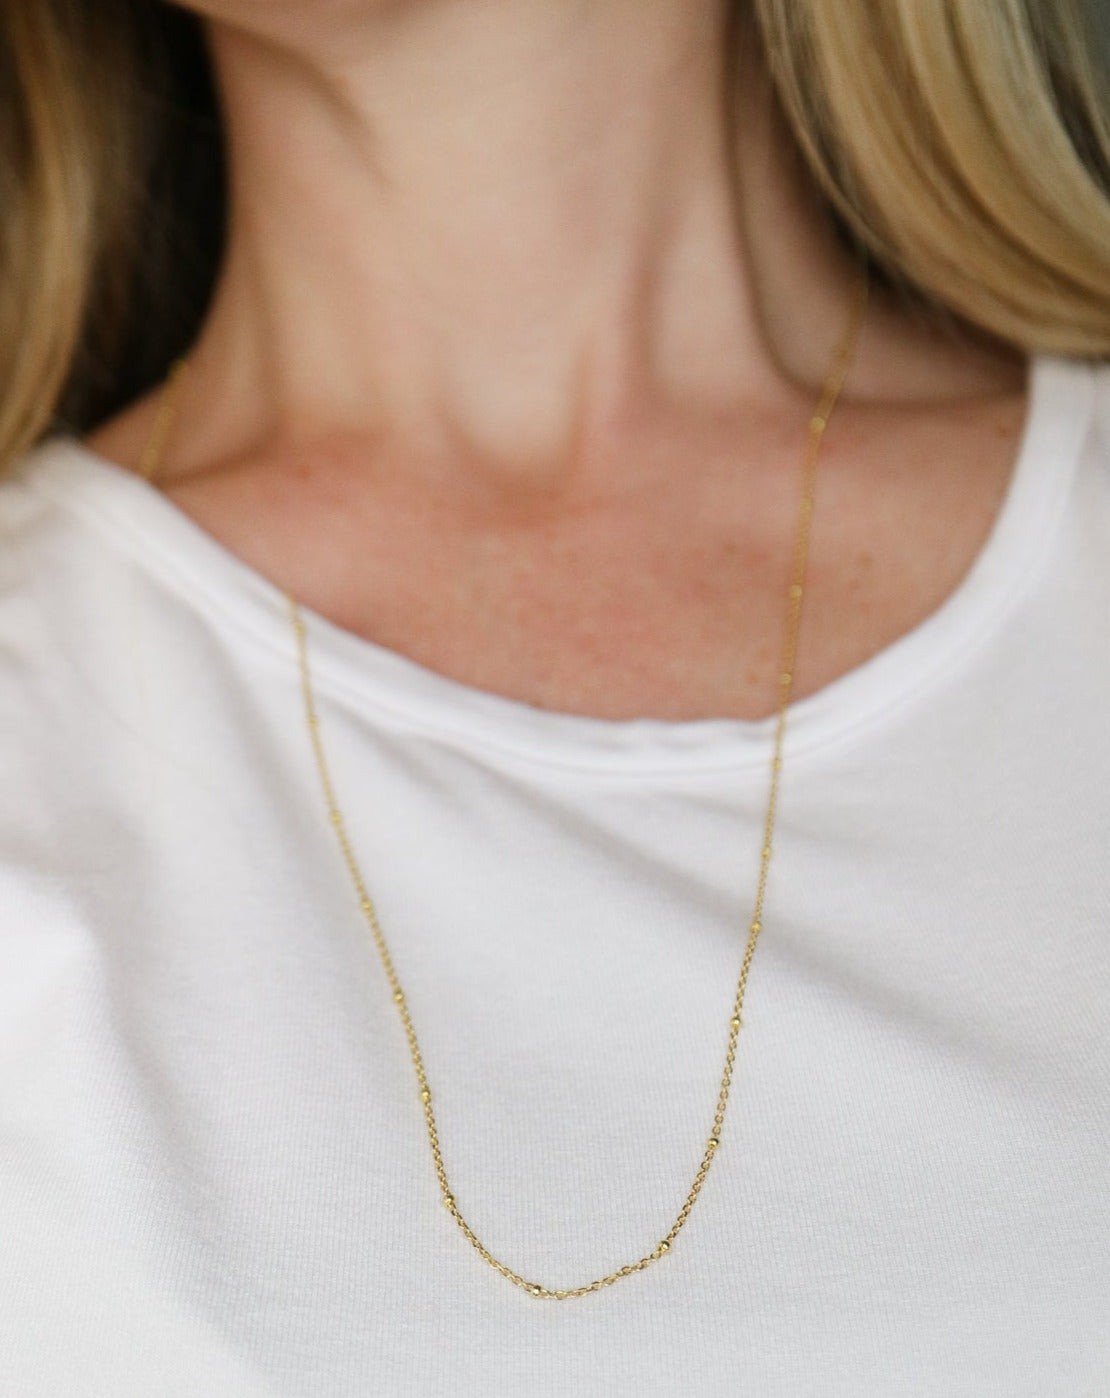 Gold beaded chain for layering necklaces